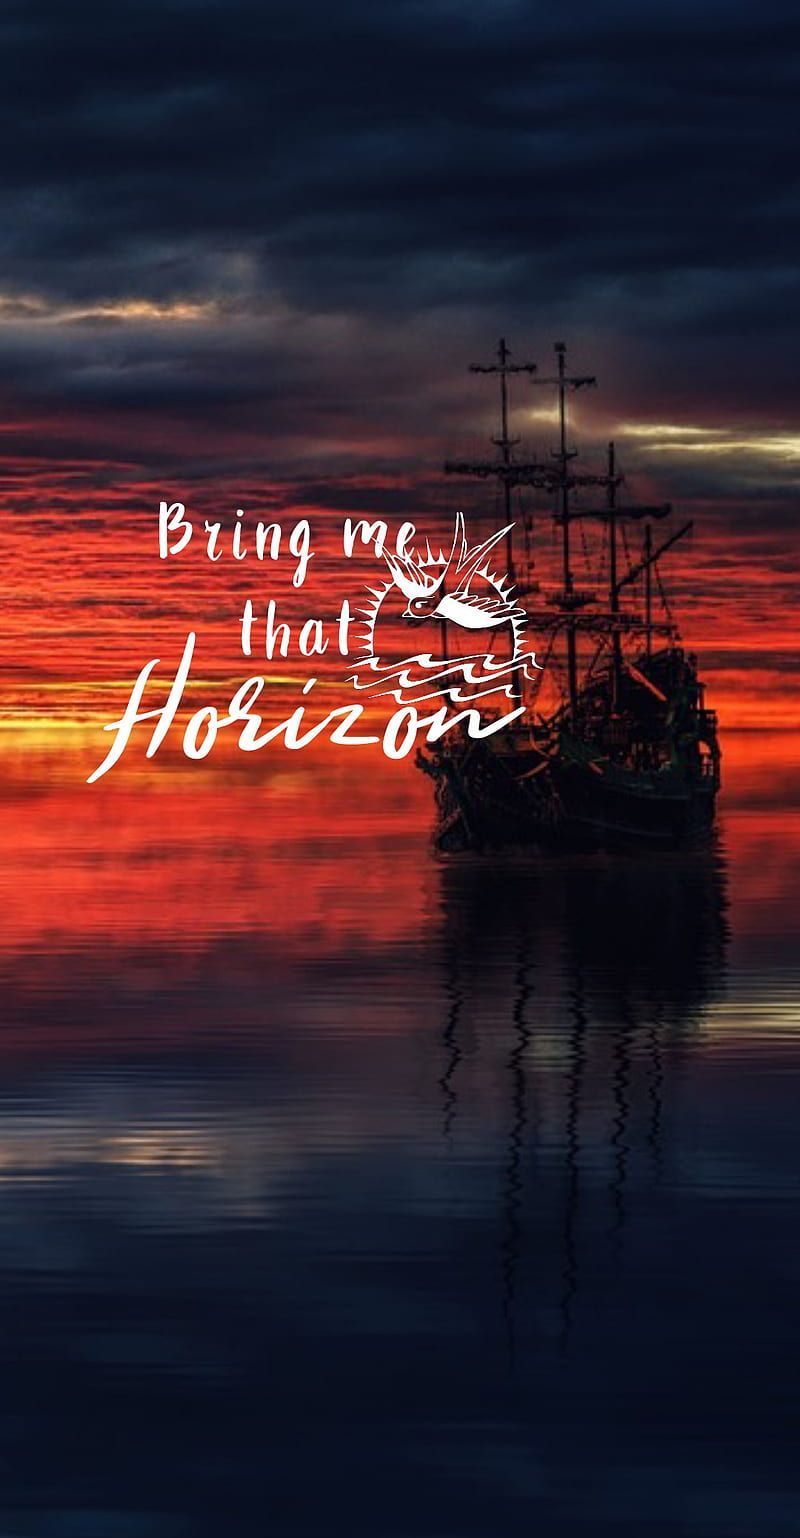 A ship at sea with the sunset in the background - Pirate